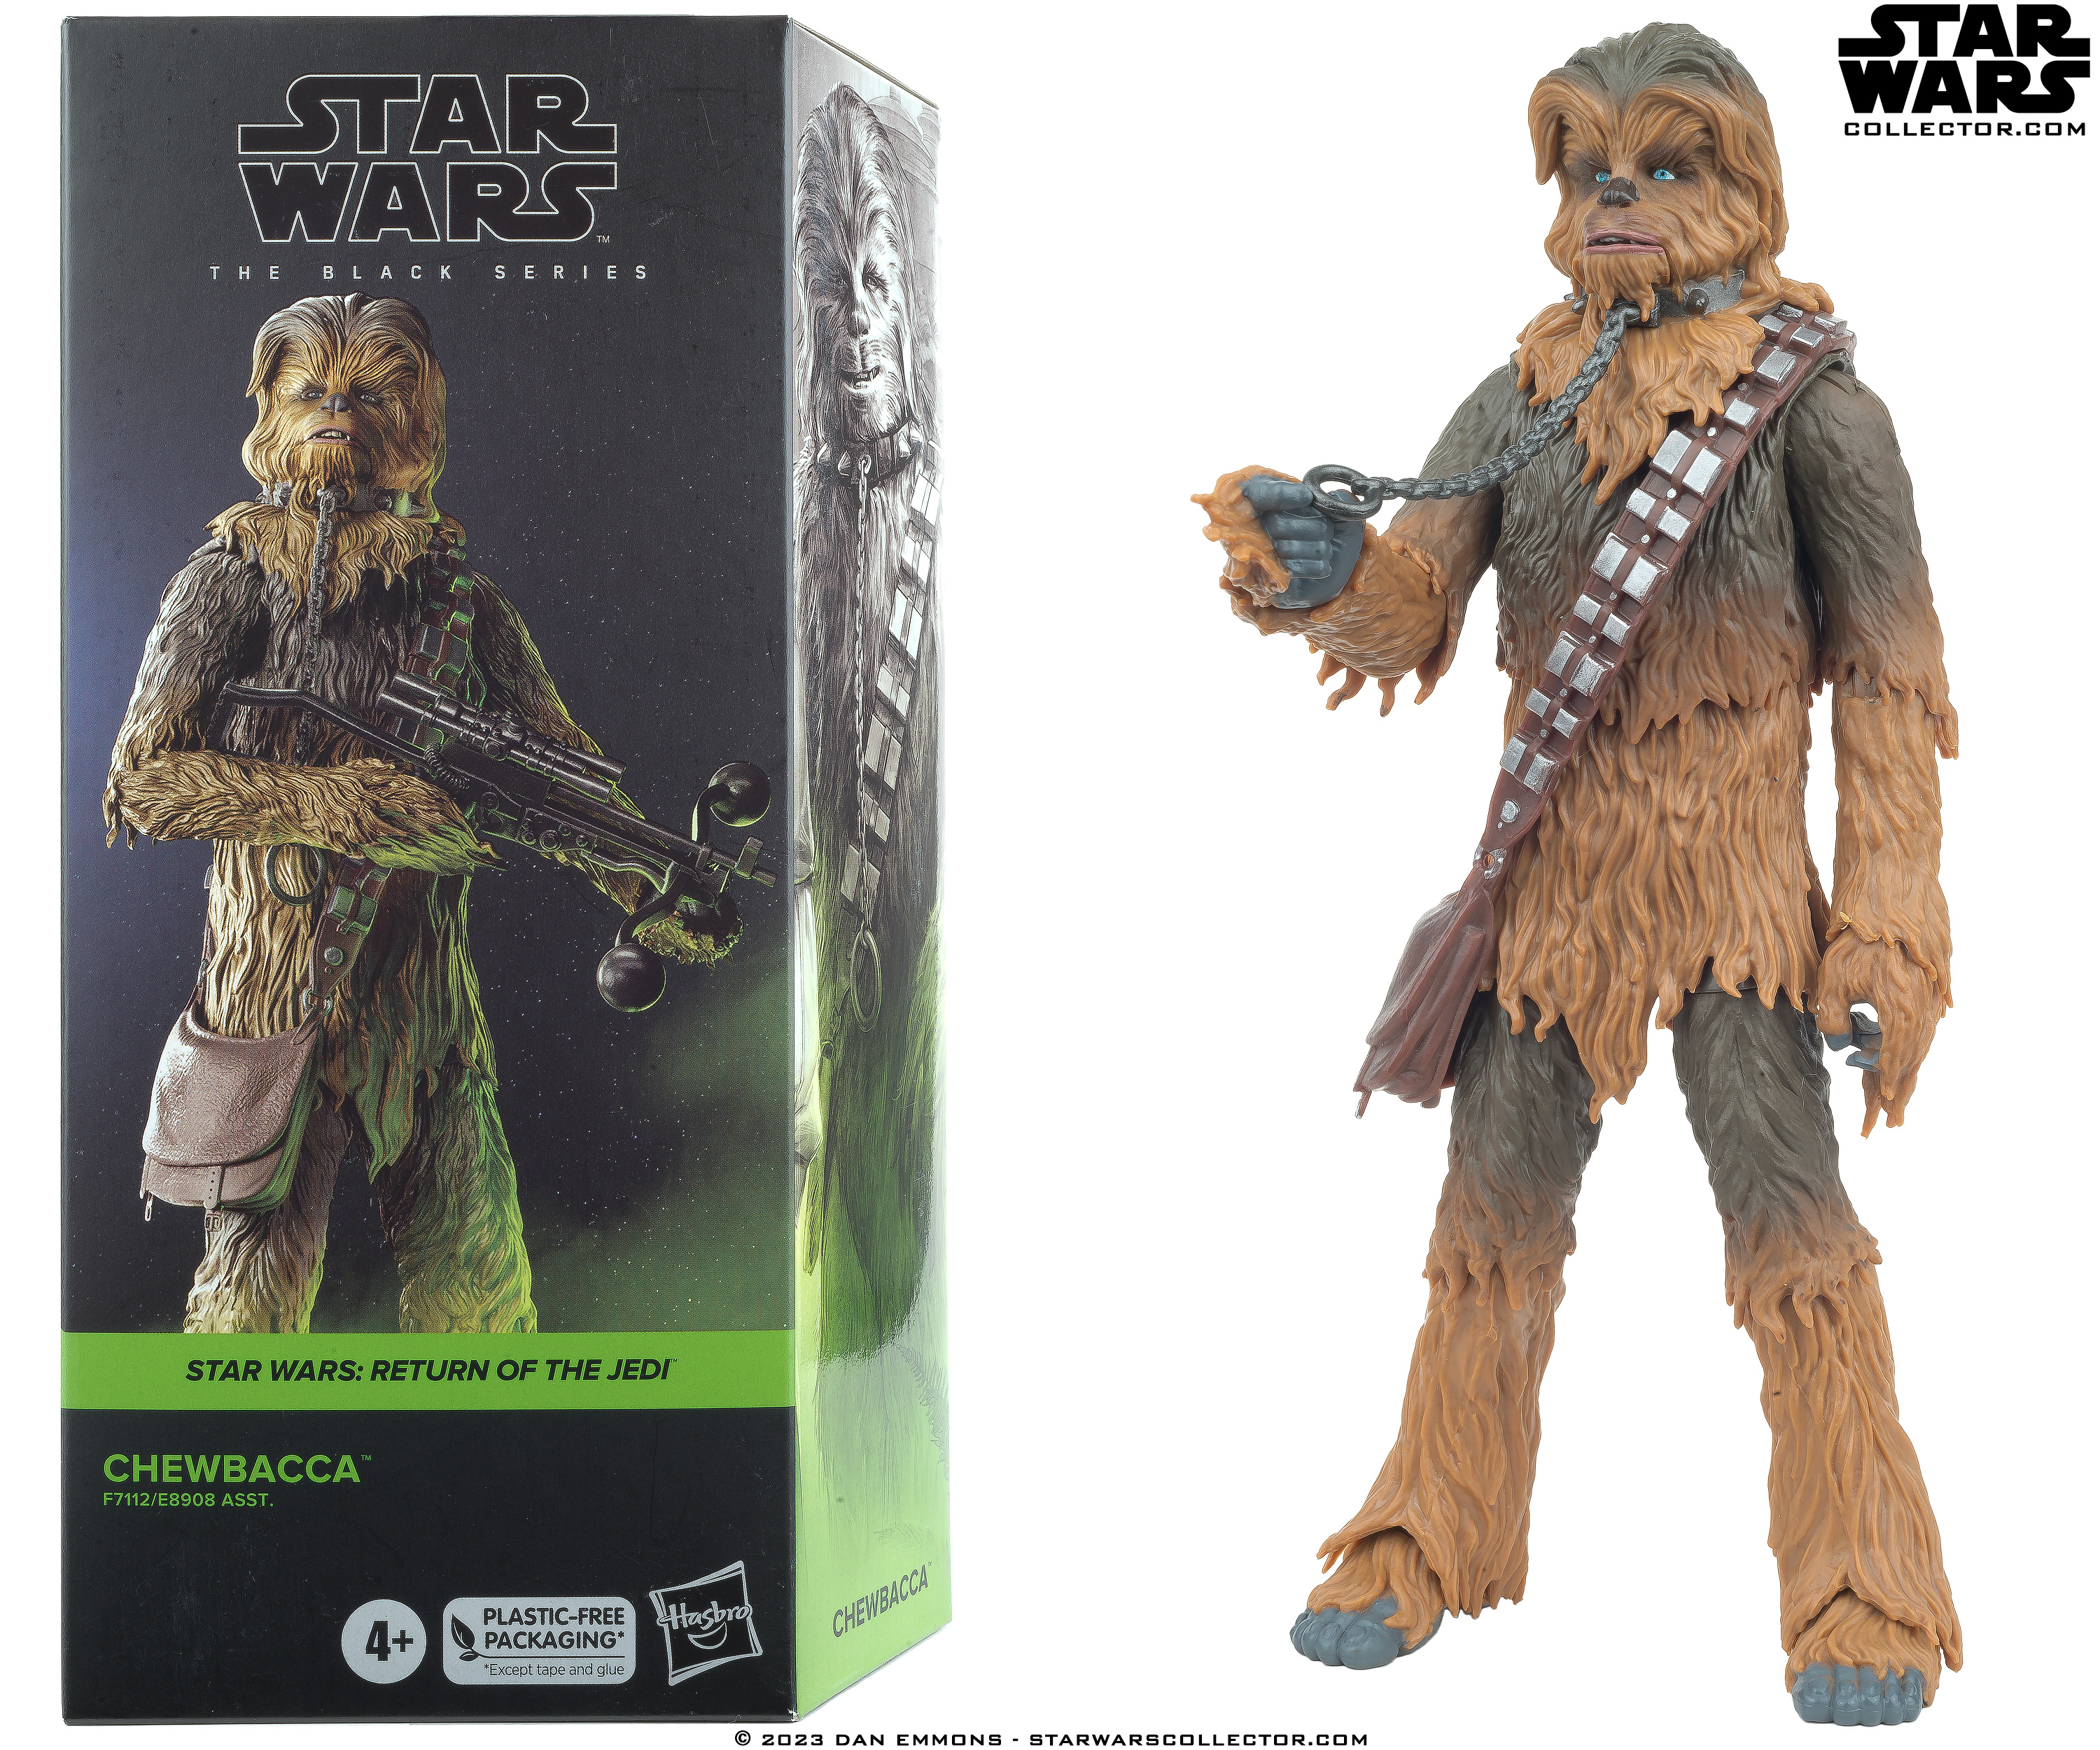 Slight Change Between TBS 6-Inch Carded ROTJ Chewbacca & Boxed ROTJ Chewbacca Figures